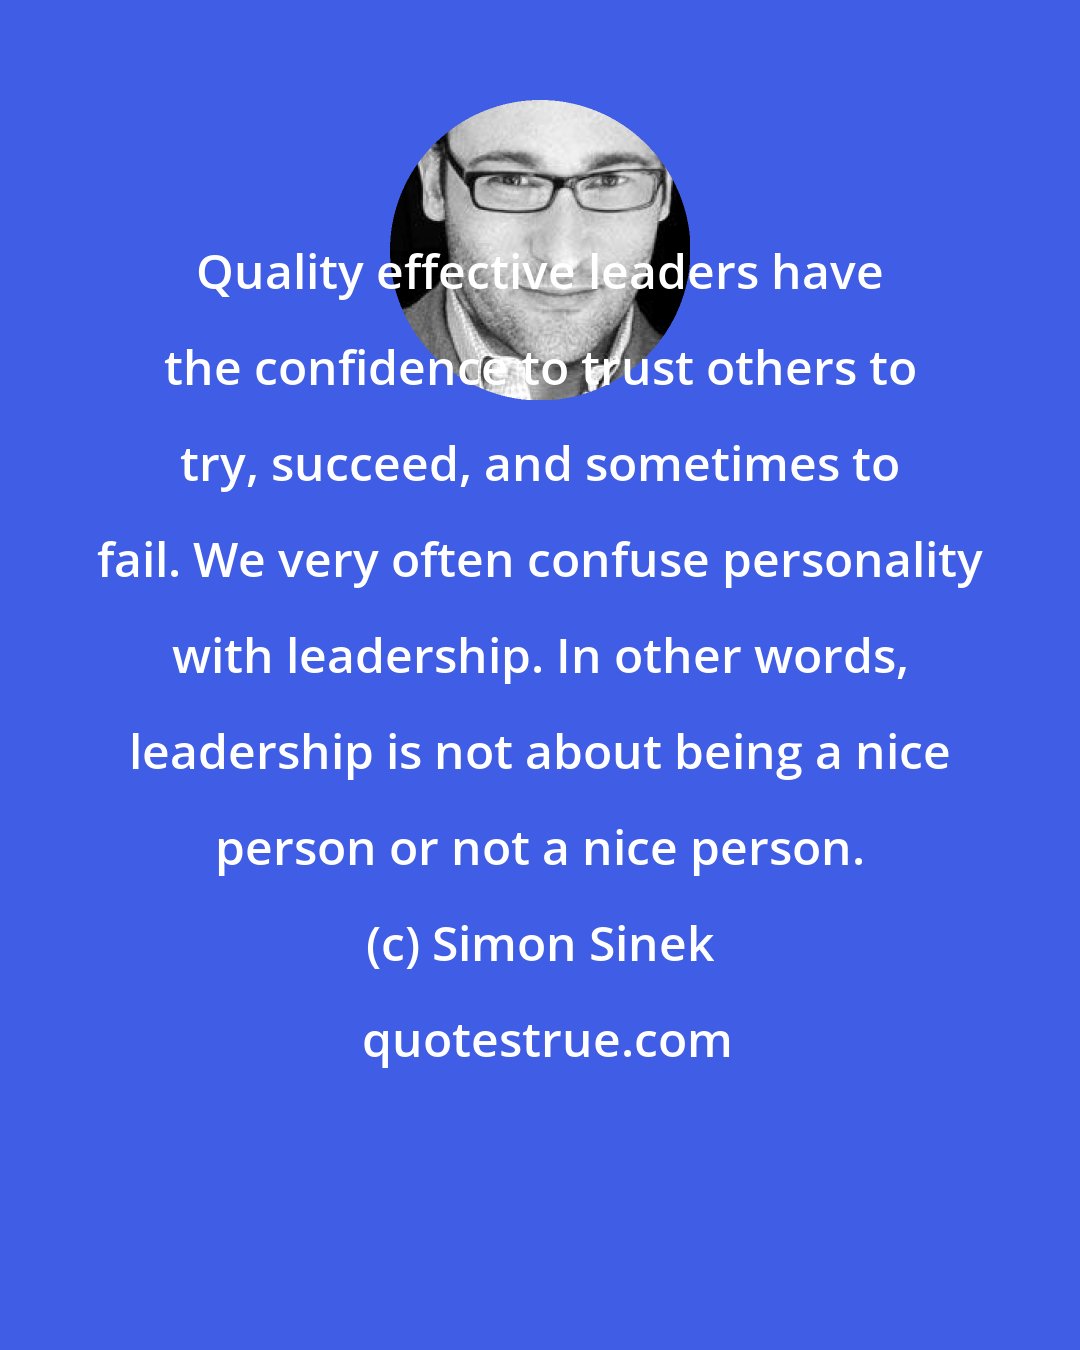 Simon Sinek: Quality effective leaders have the confidence to trust others to try, succeed, and sometimes to fail. We very often confuse personality with leadership. In other words, leadership is not about being a nice person or not a nice person.